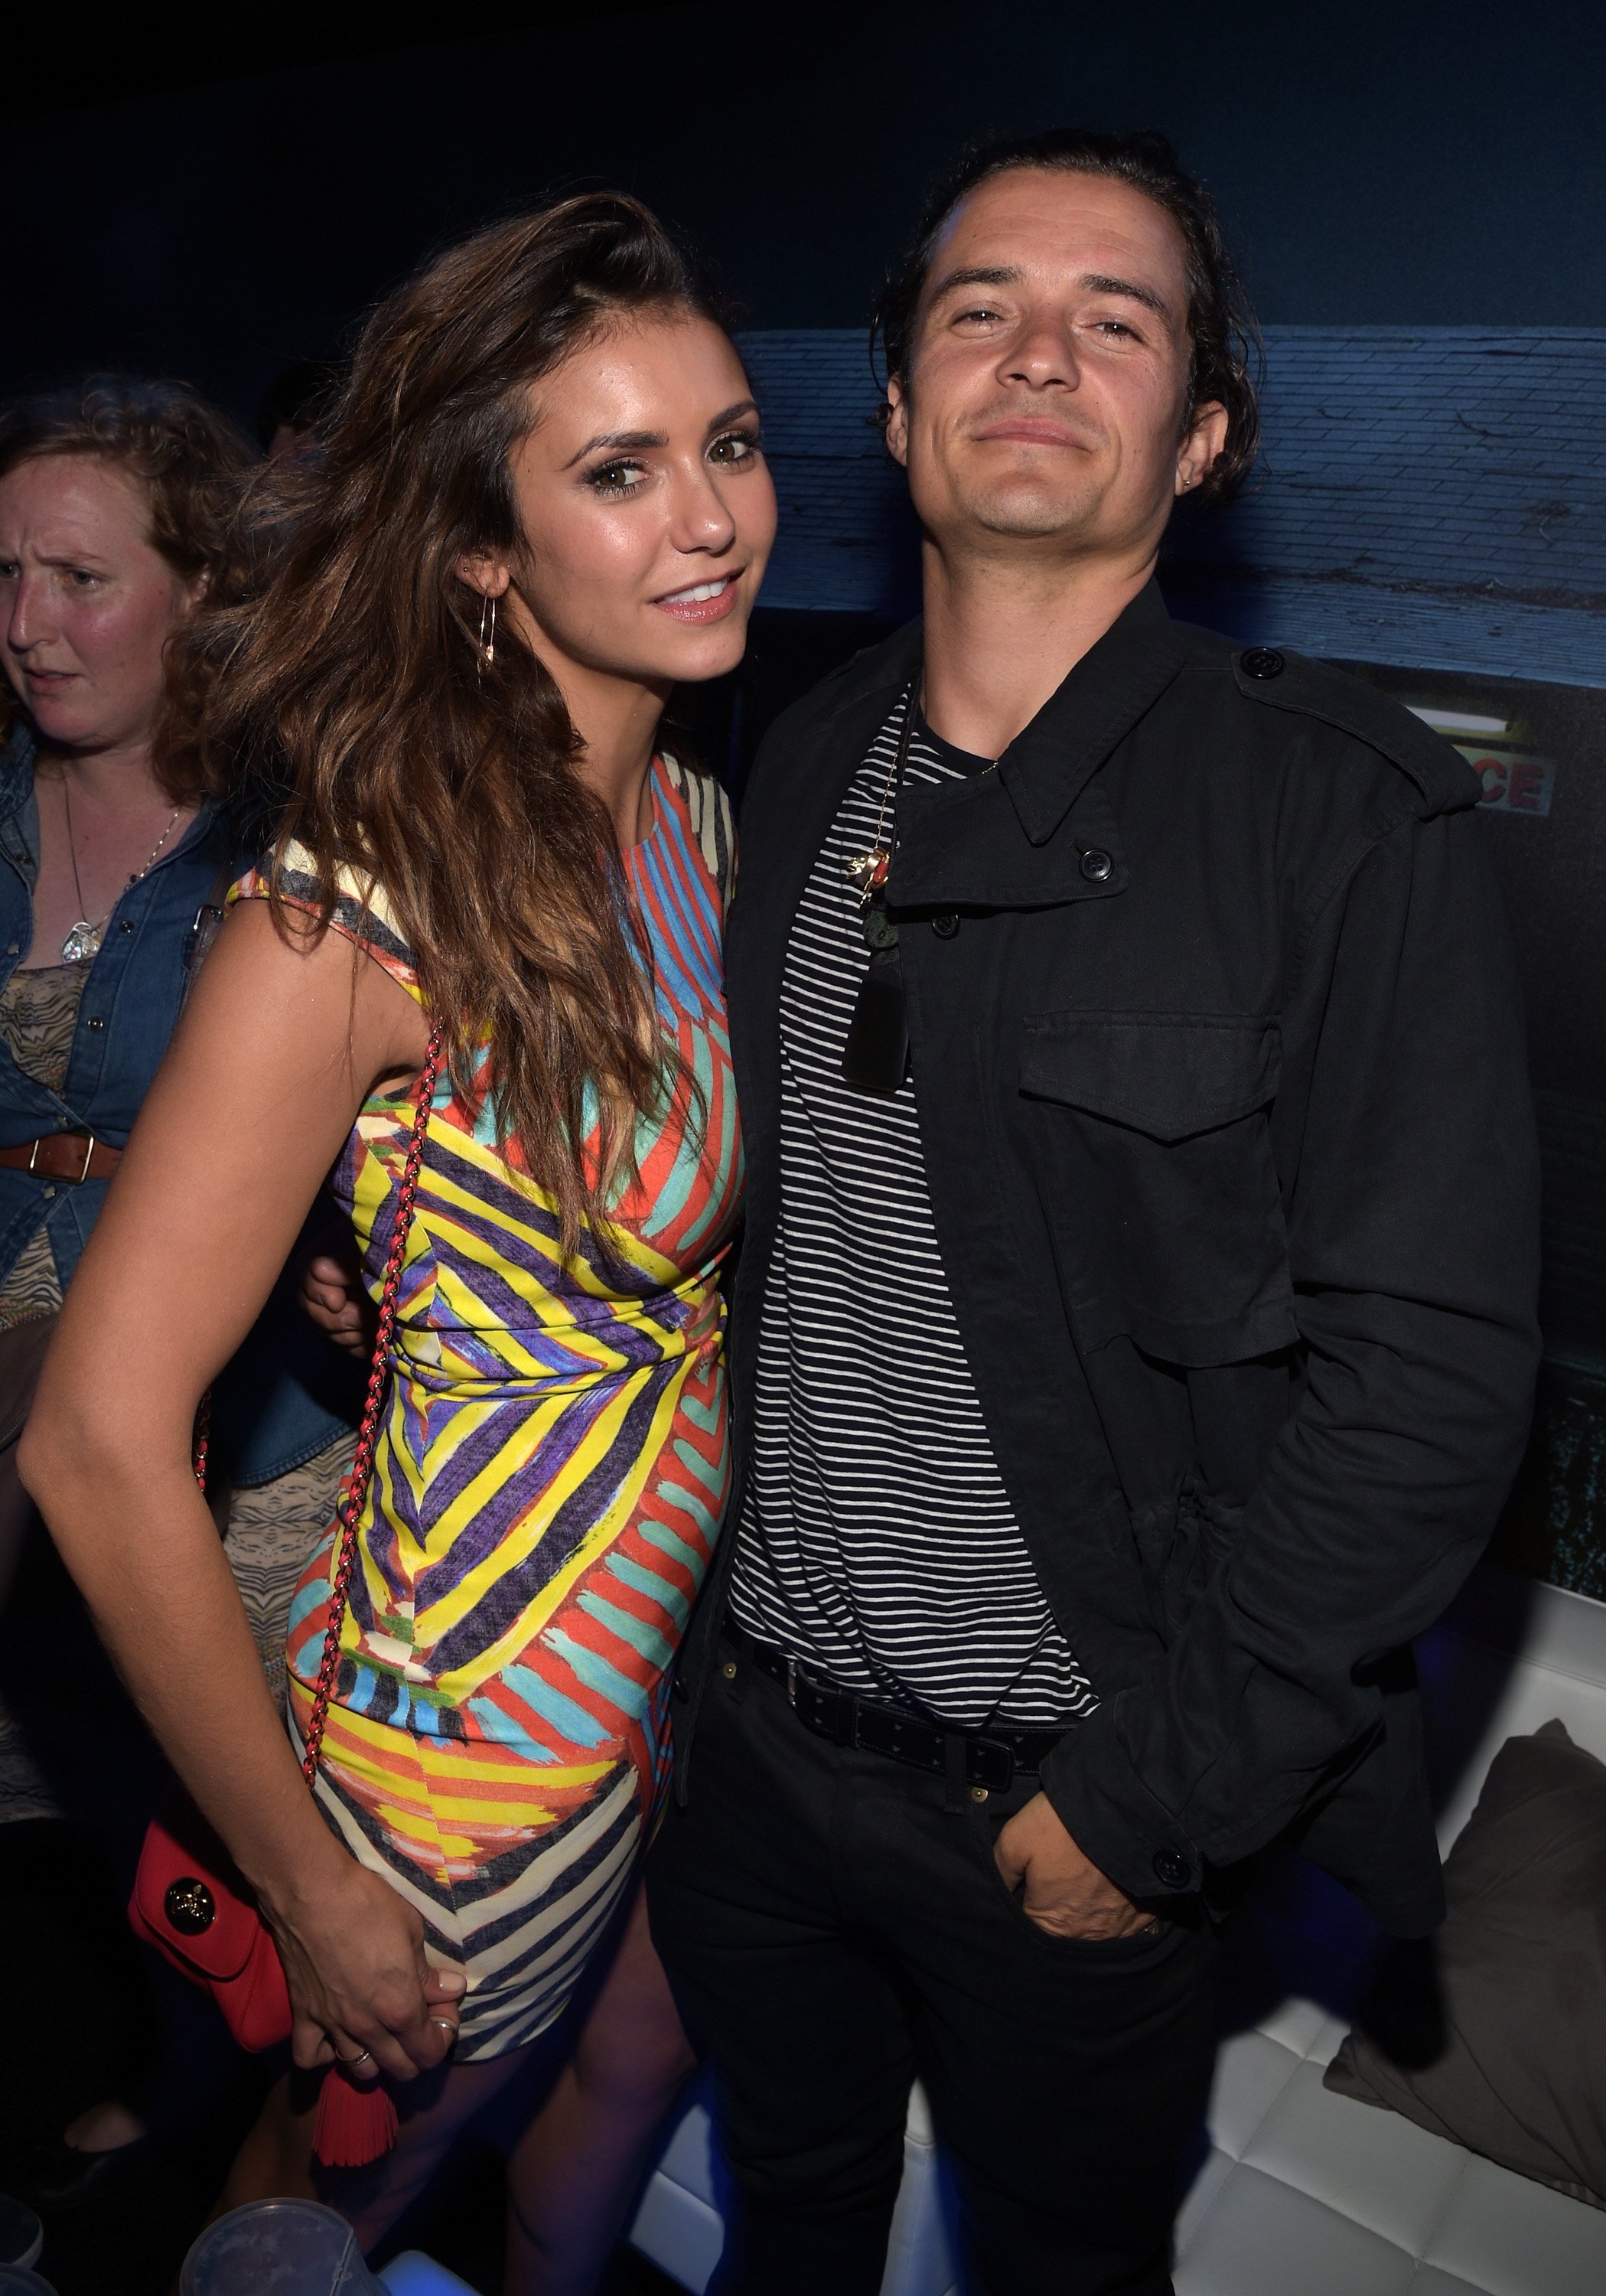 Nina Dobrev and Orlando Bloom attend the Playboy and A&E Bates Motel event at Comic-Con on July 25, 2014, in San Diego, California. | Source: Getty Images